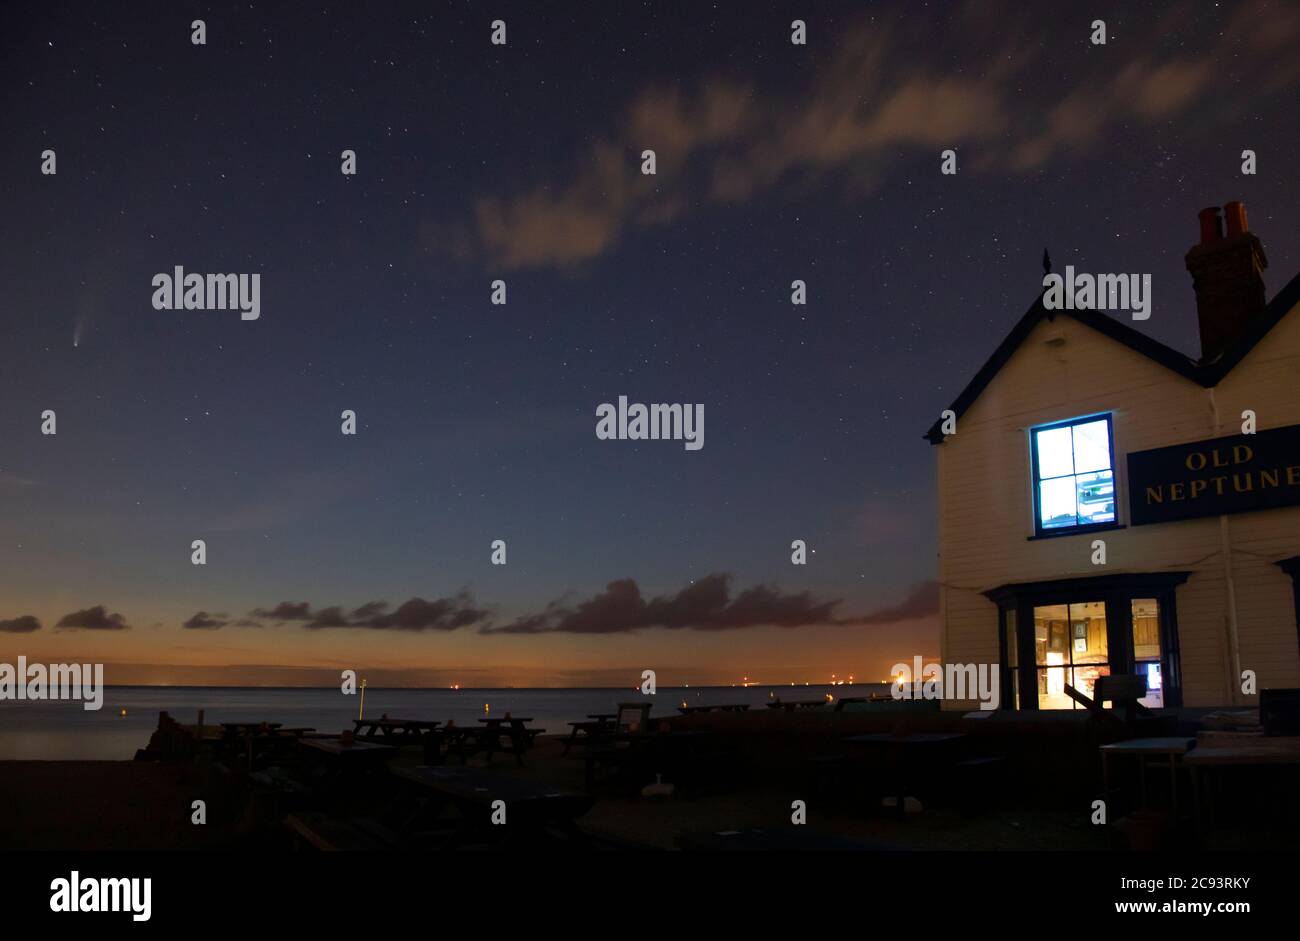 Comet NEOWISE Over The Old Neptune pub, Whitstable, Kent, Royaume-Uni, le 20 juillet 2020. Banque D'Images